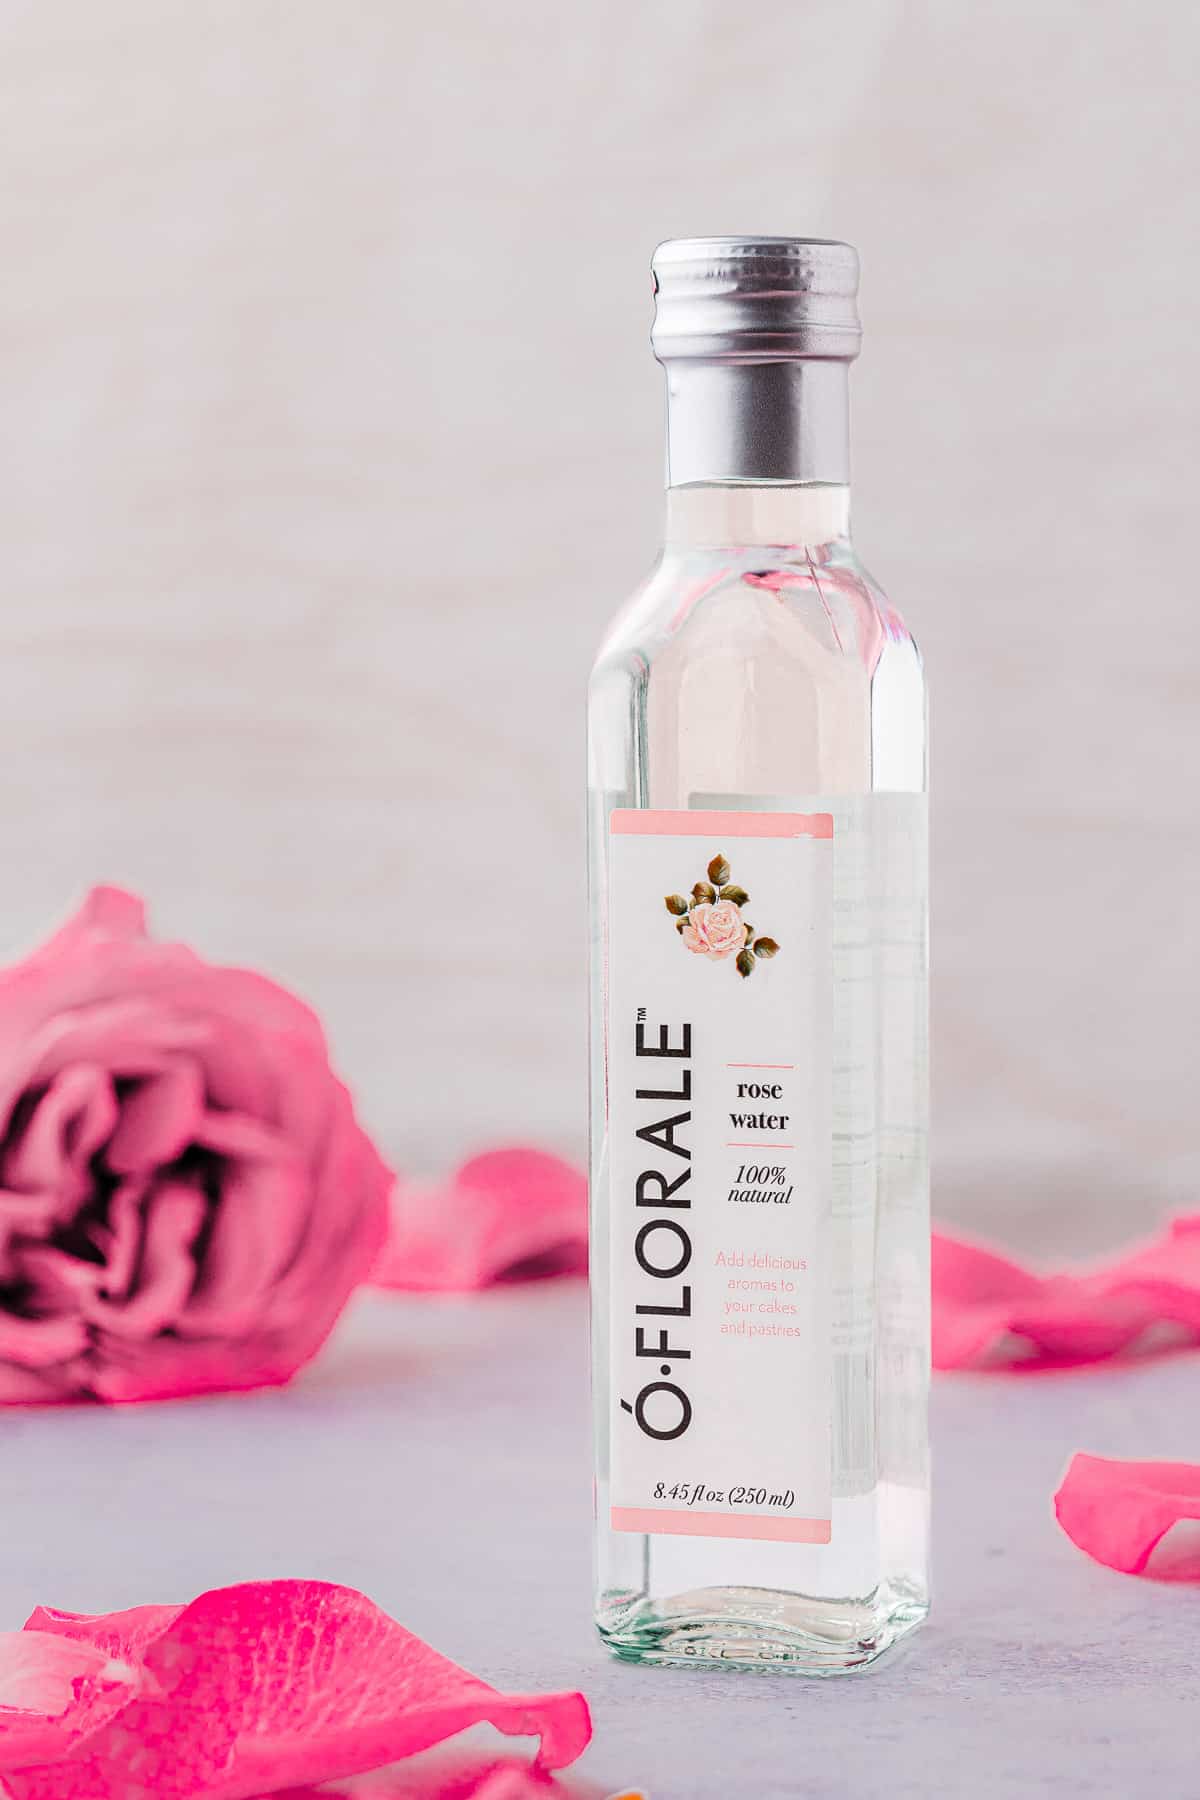 a bottle of o'florale rose water next to a pink rose and rose petals.